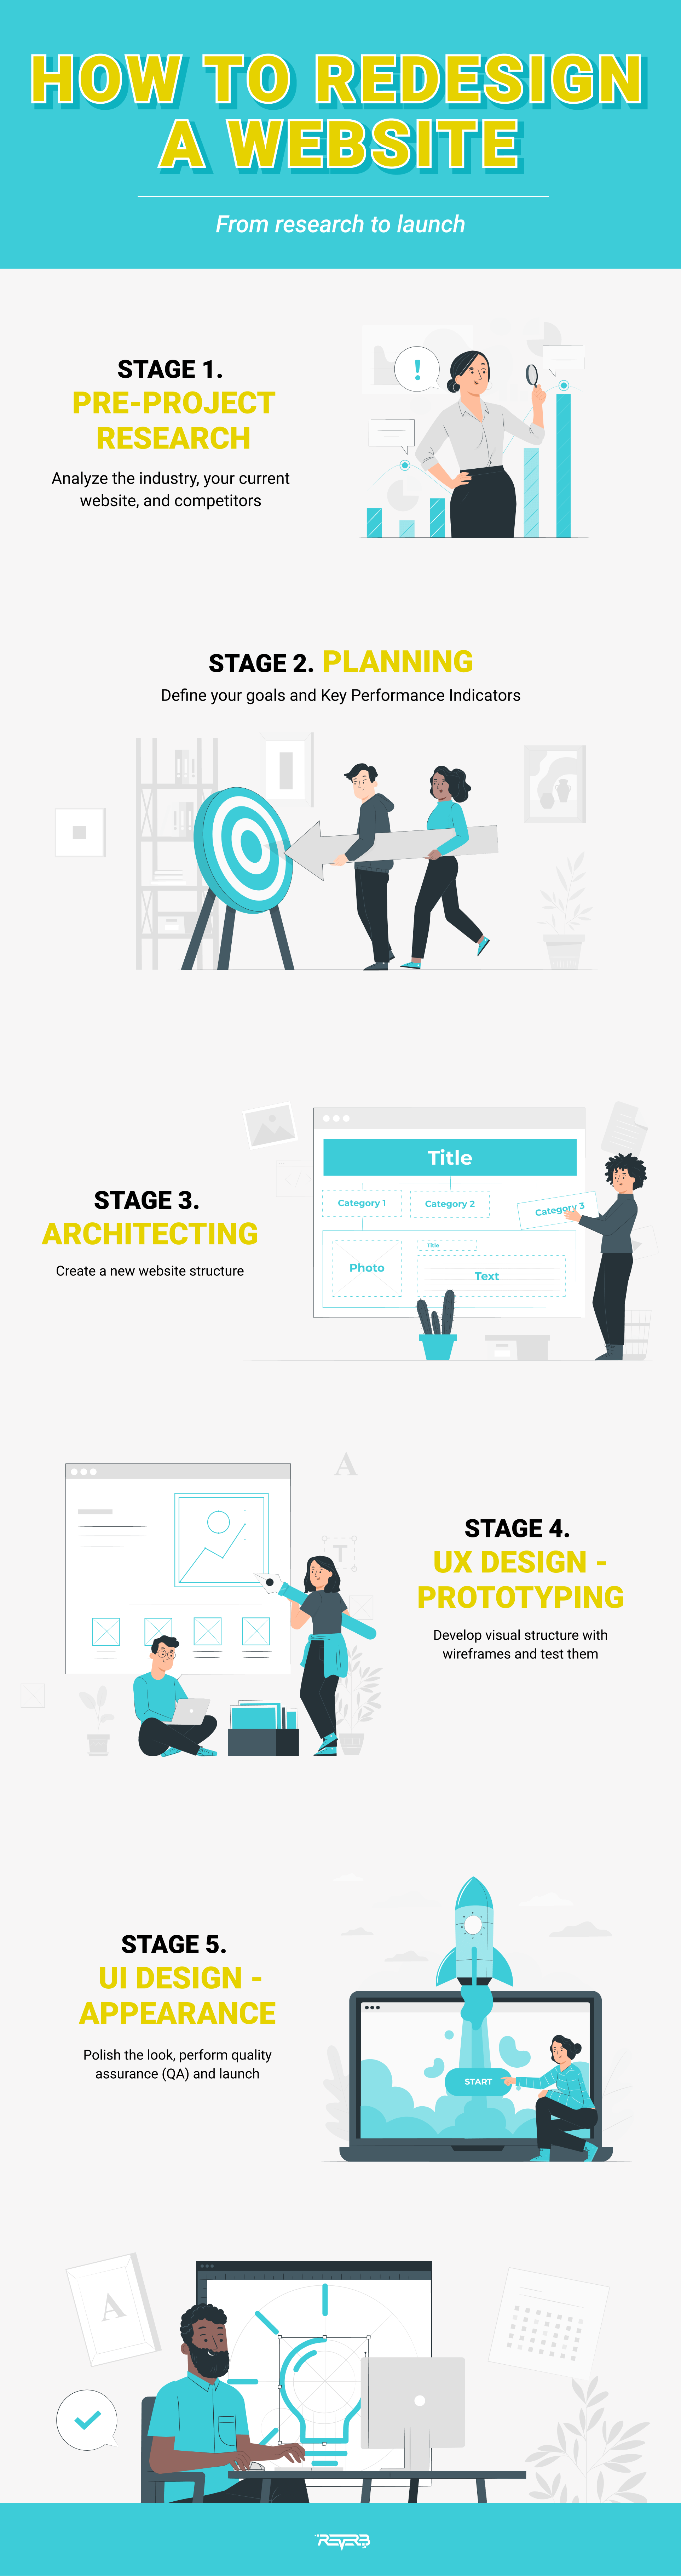 how to redesign a website steps